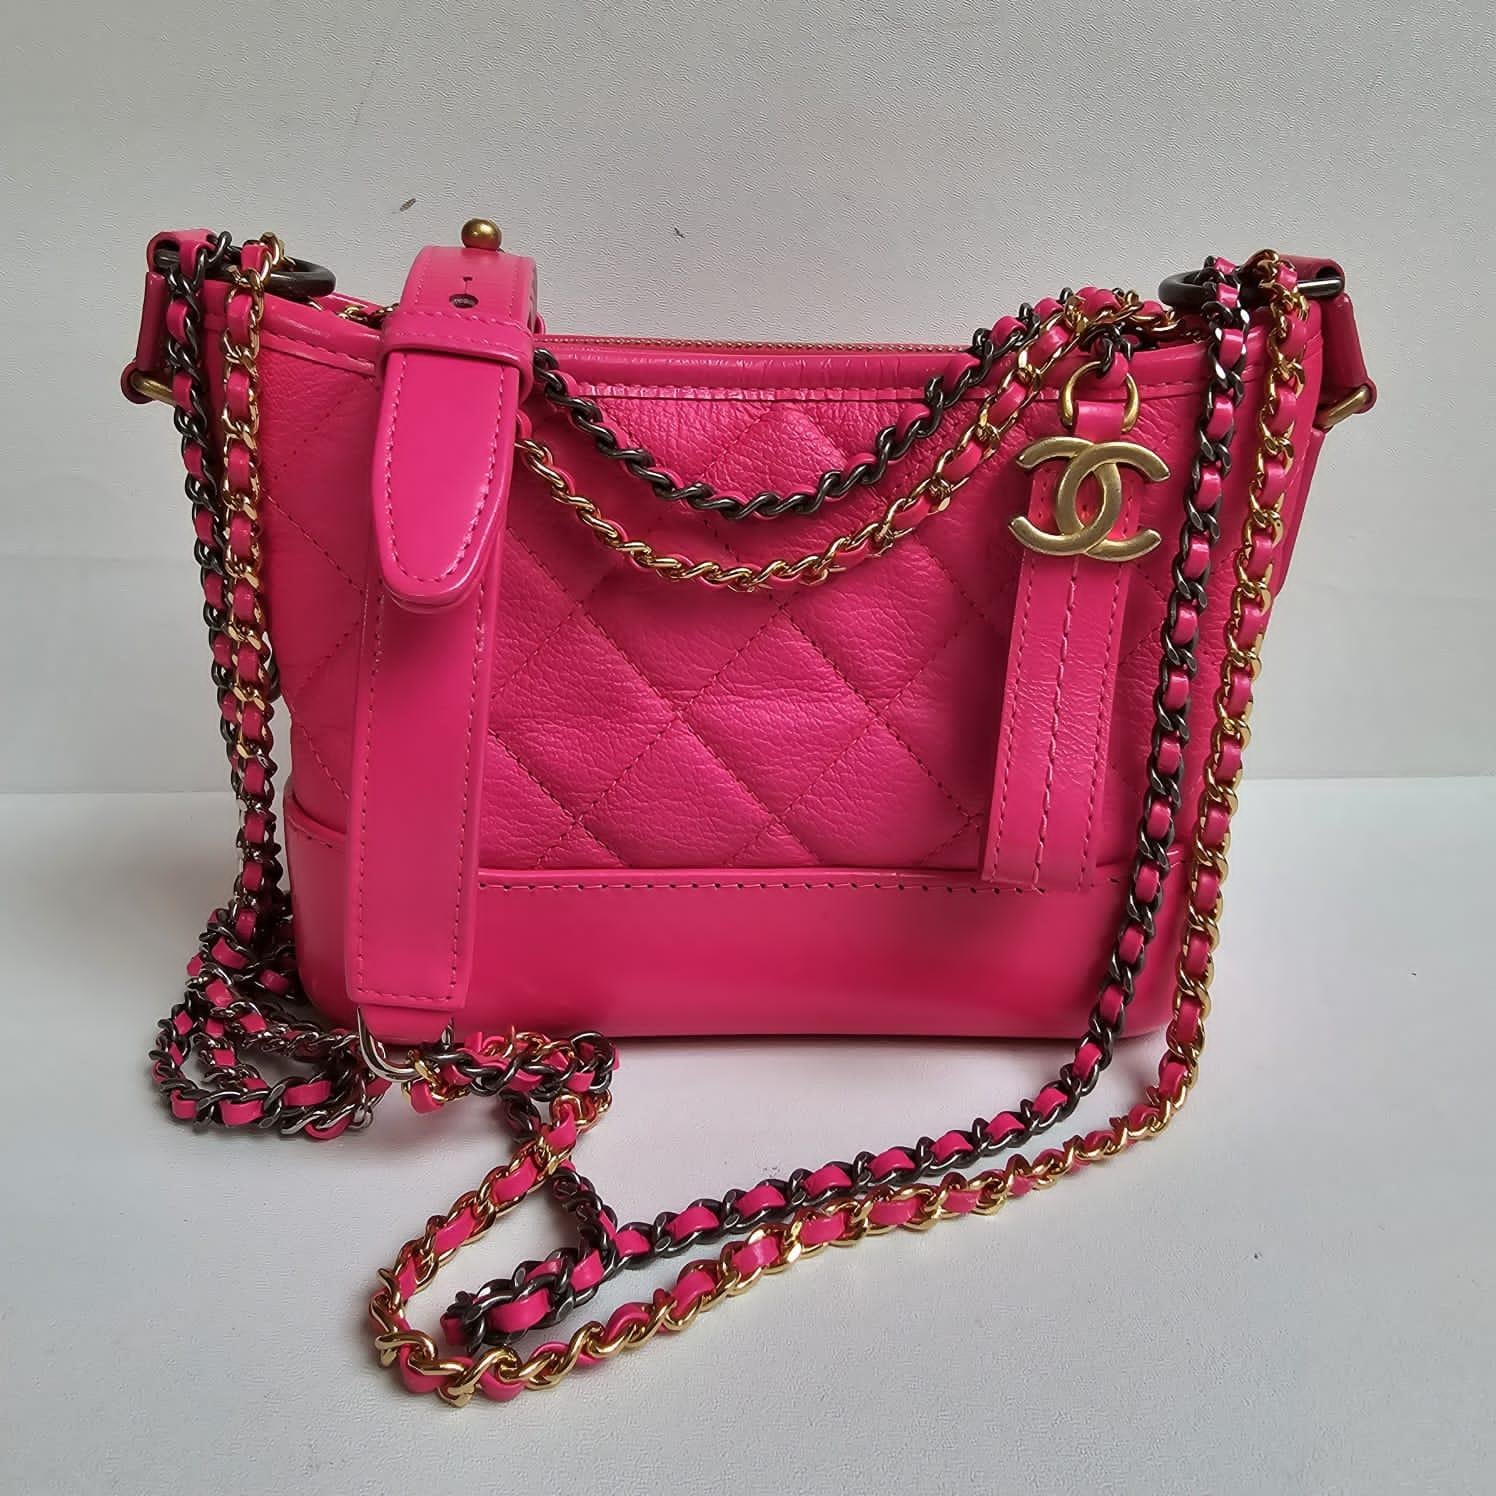 Chanel Neon Pink Small Gabrielle Bag In Good Condition For Sale In Jakarta, Daerah Khusus Ibukota Jakarta